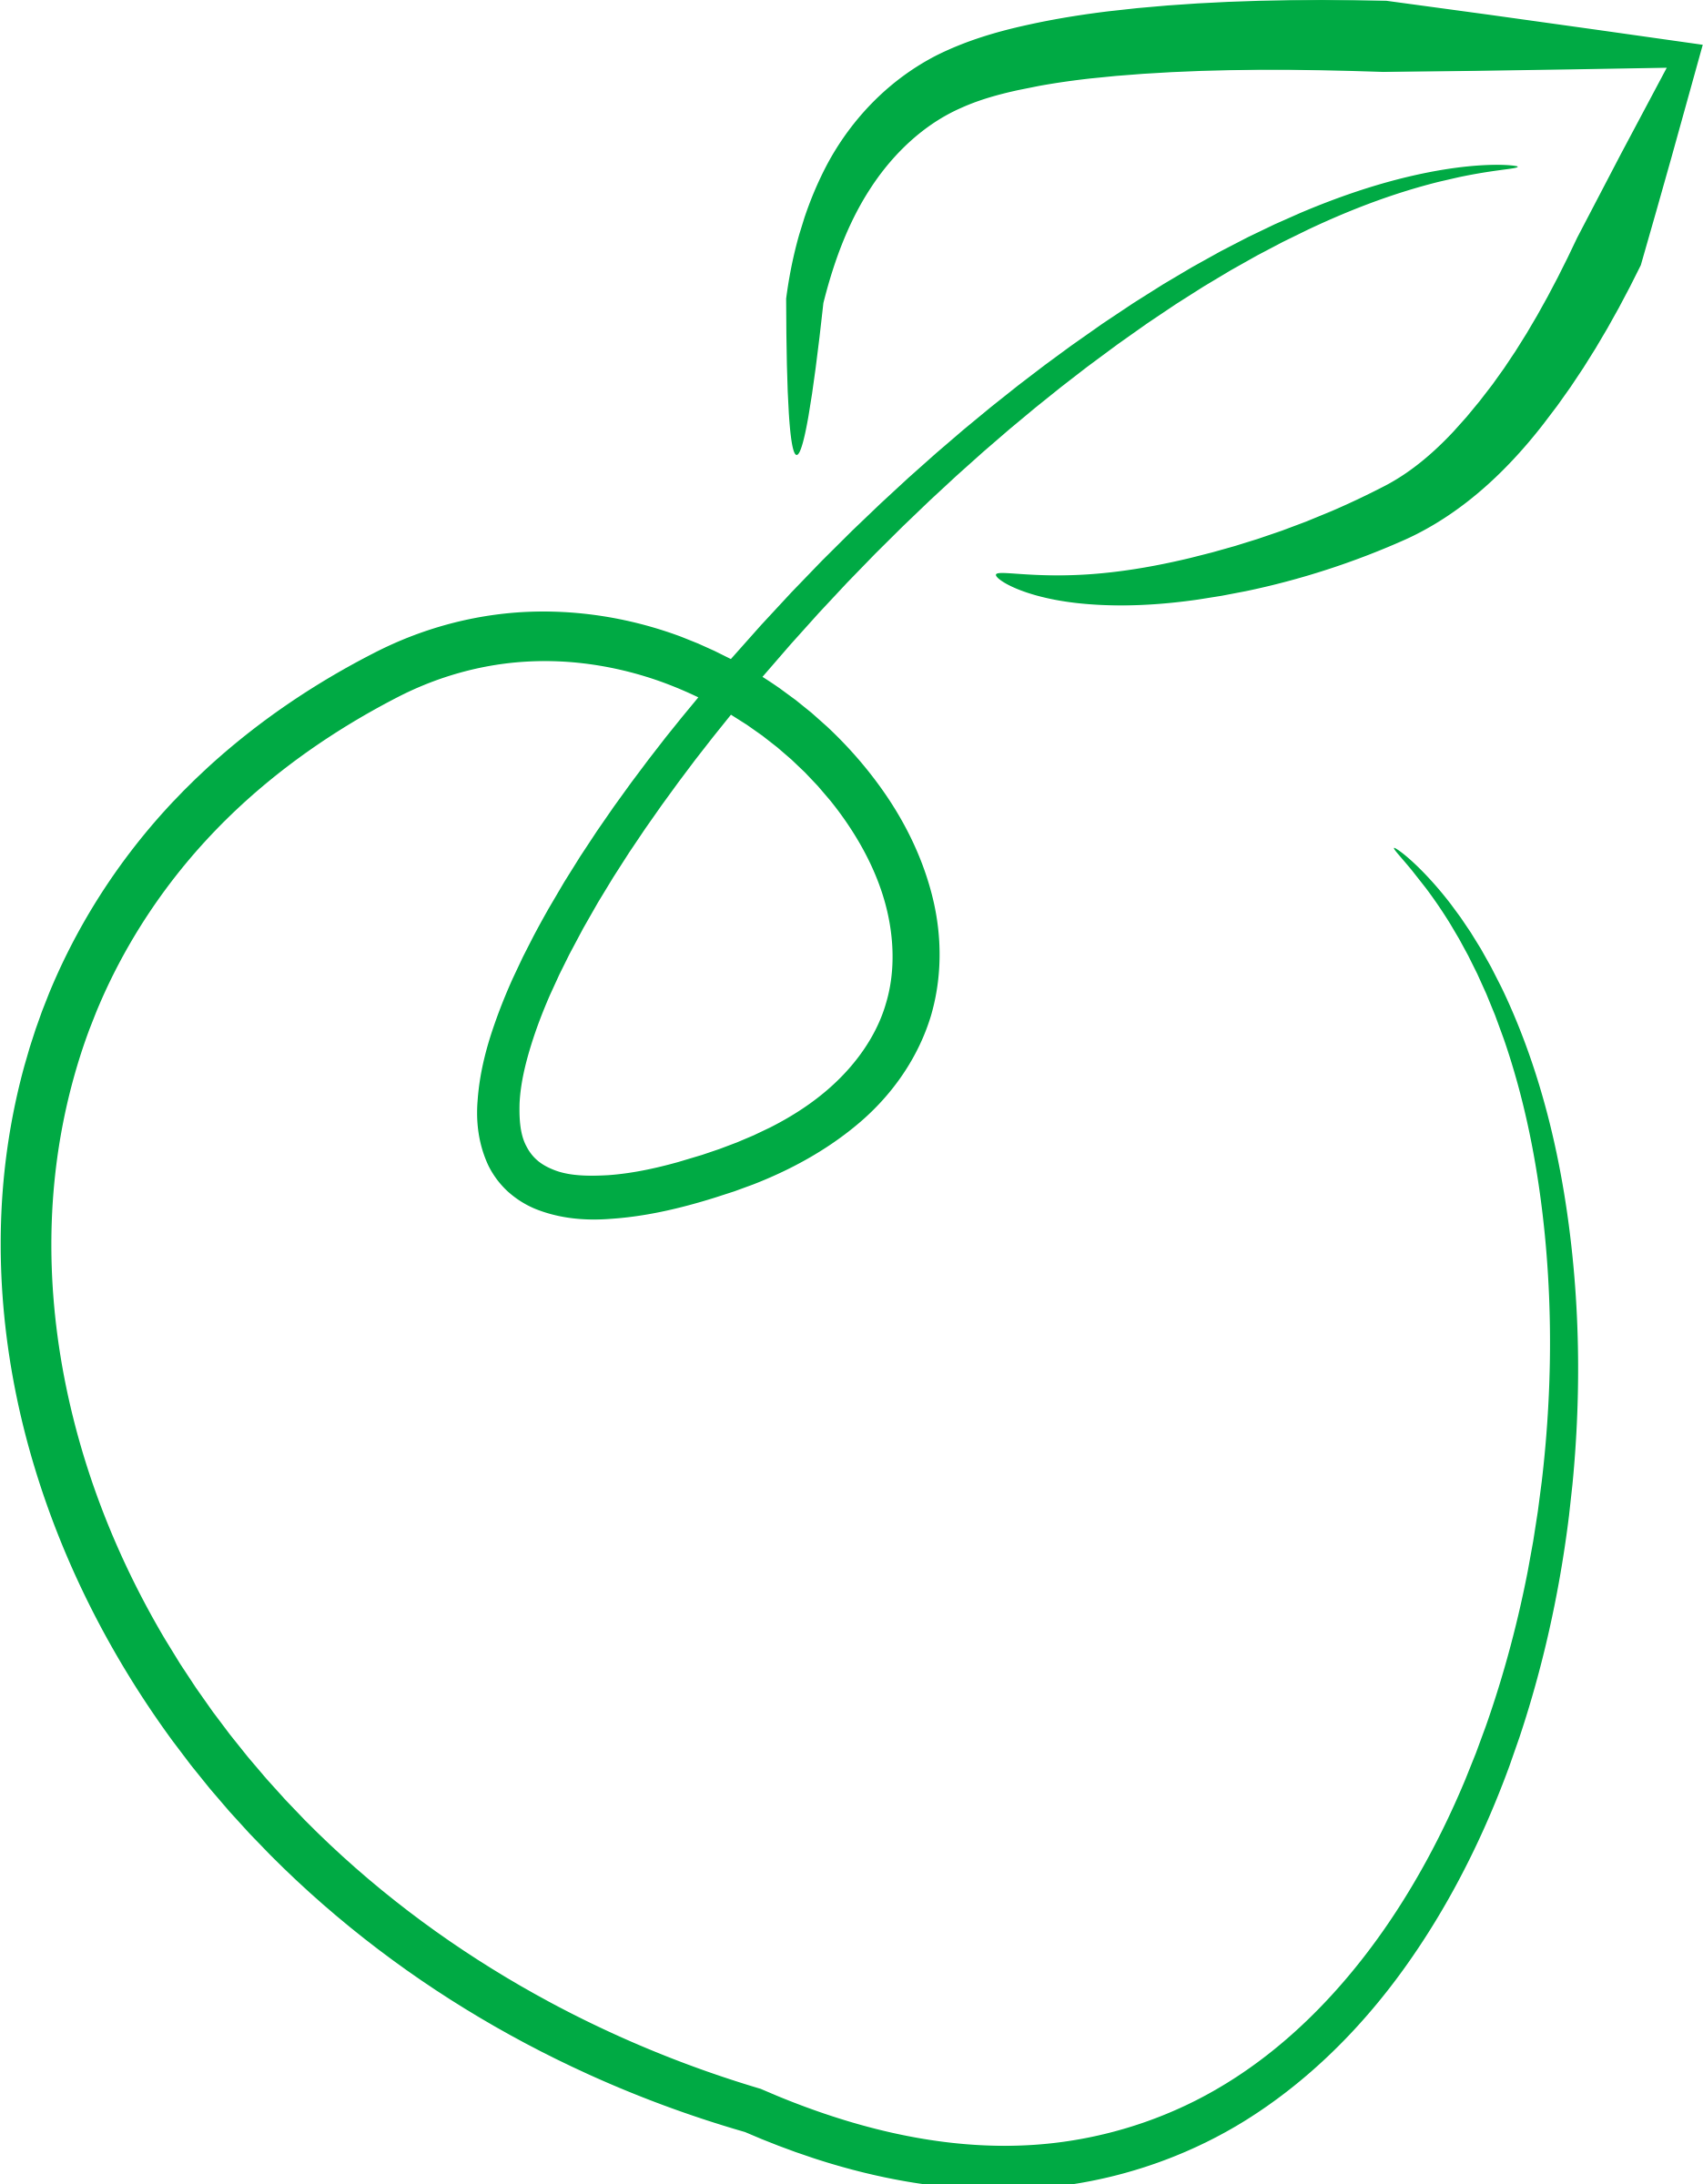 clipart apple drawing